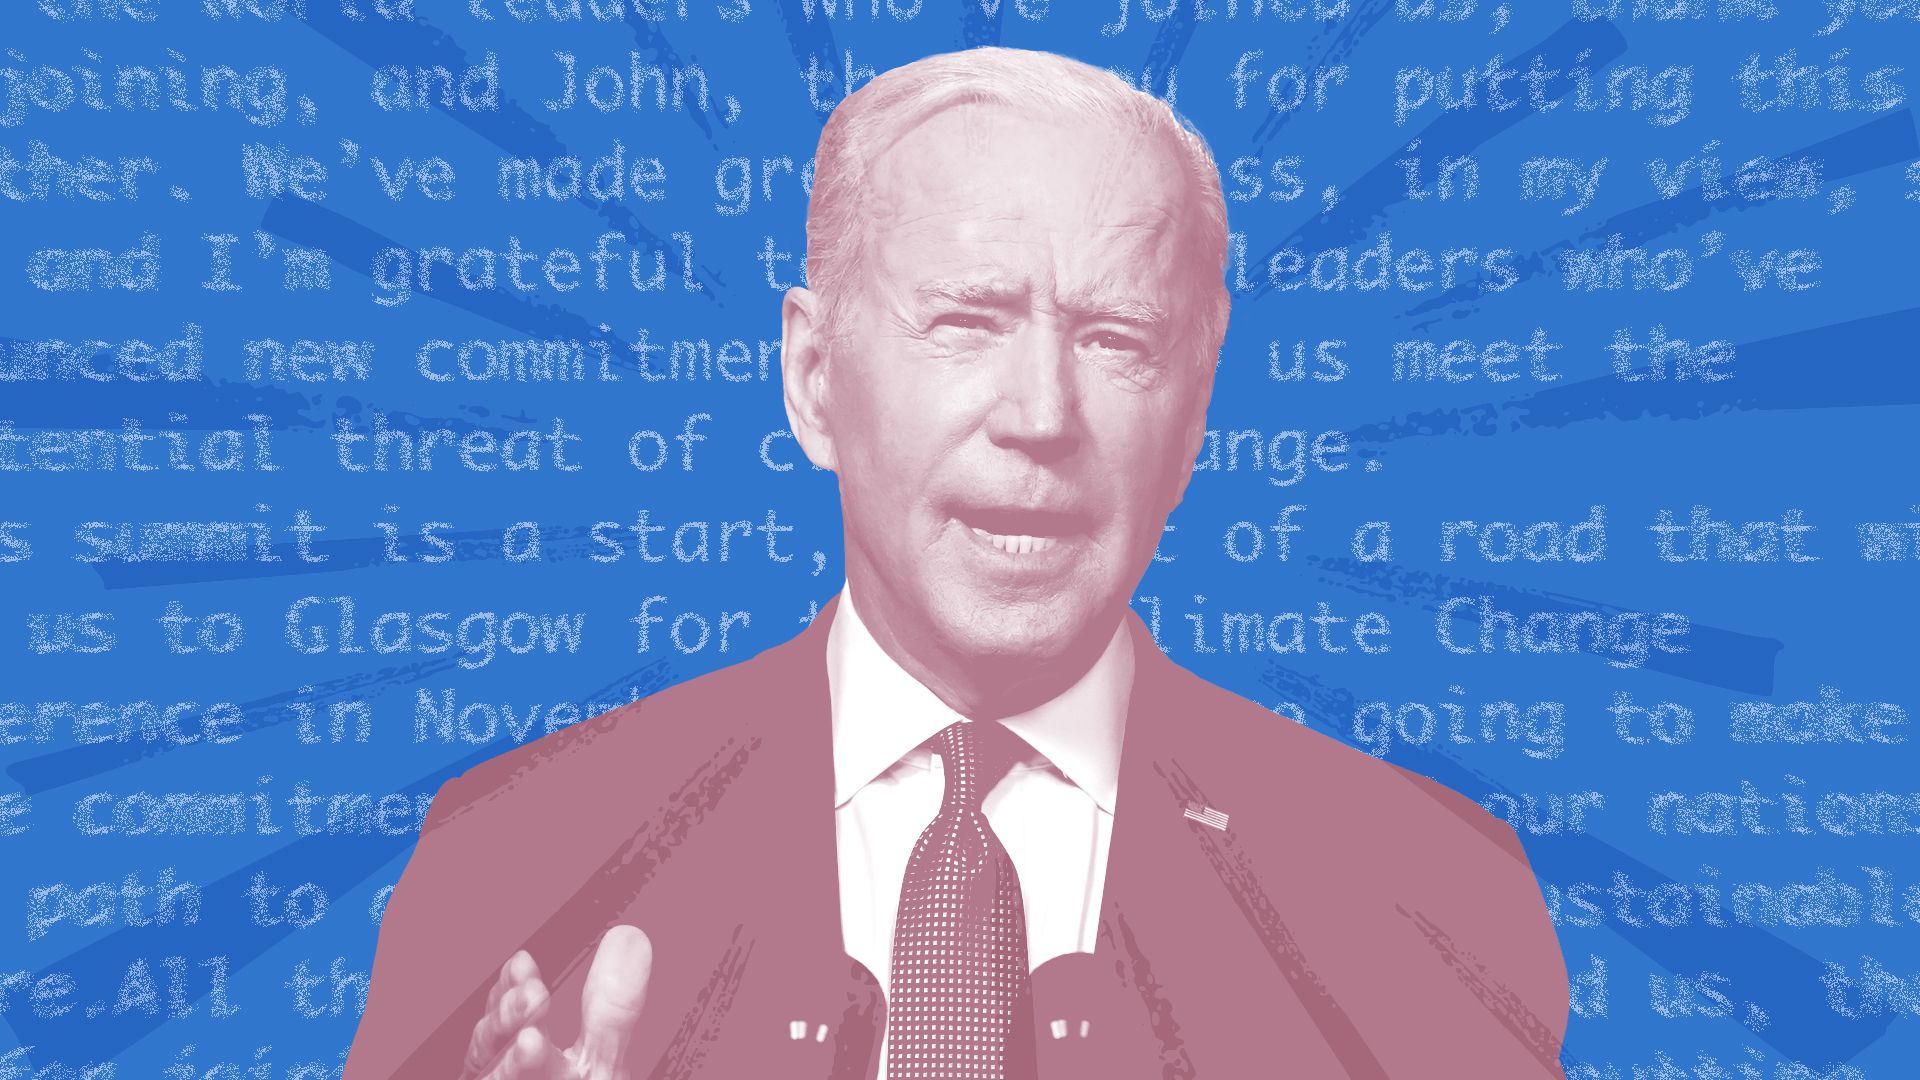 Photo illustration of President Biden with part of a transcript from a speech visible behind him